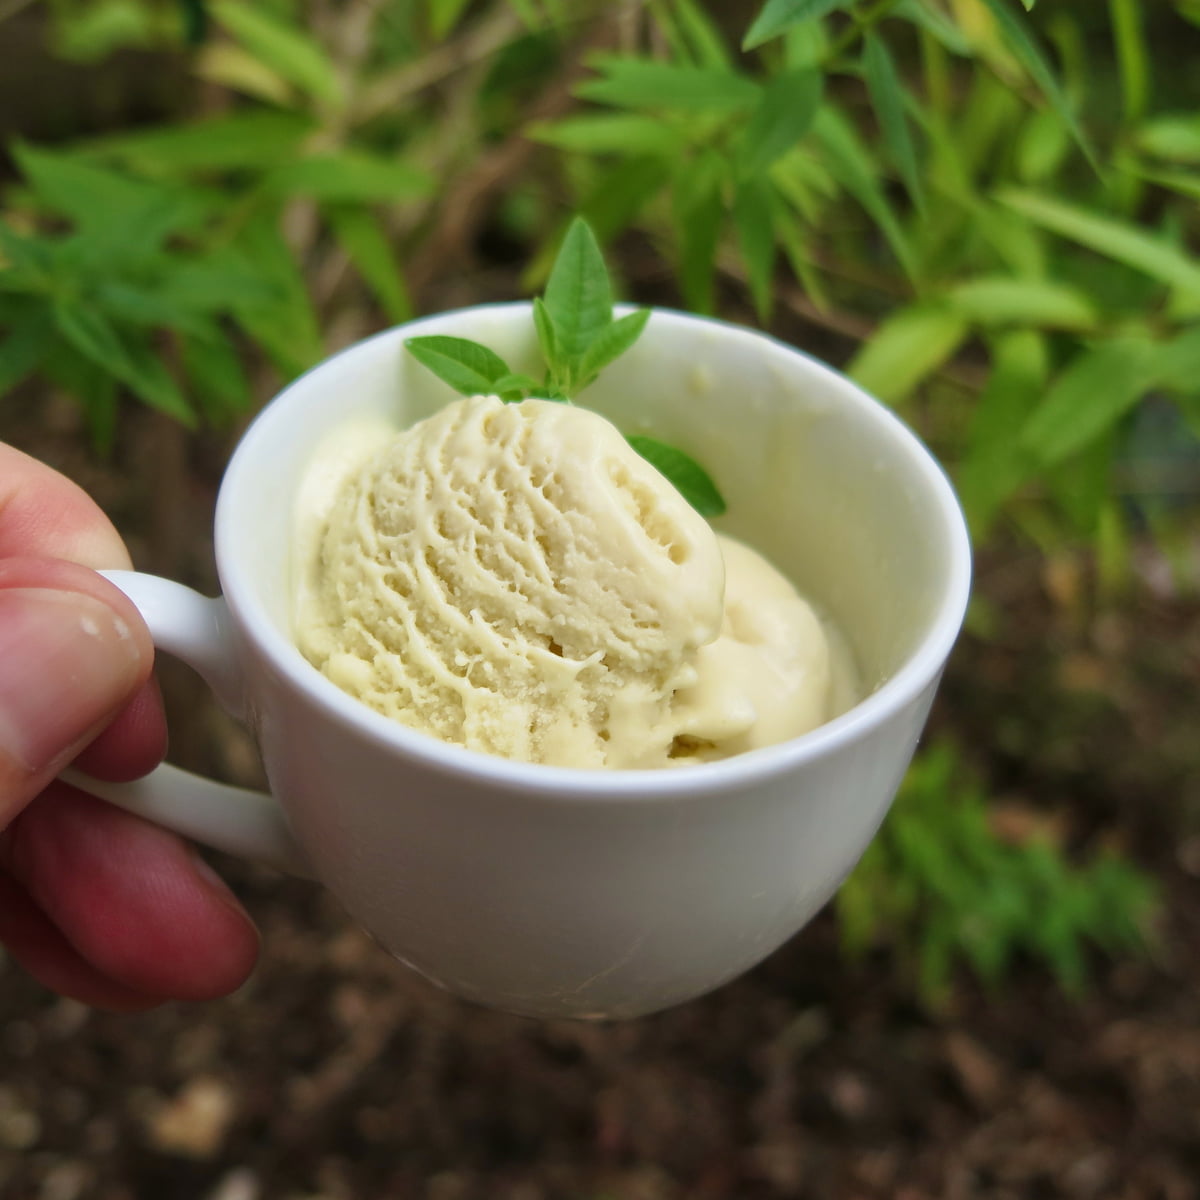 mini cup of creamy ice cream with a sprig of lemon verbena leaves